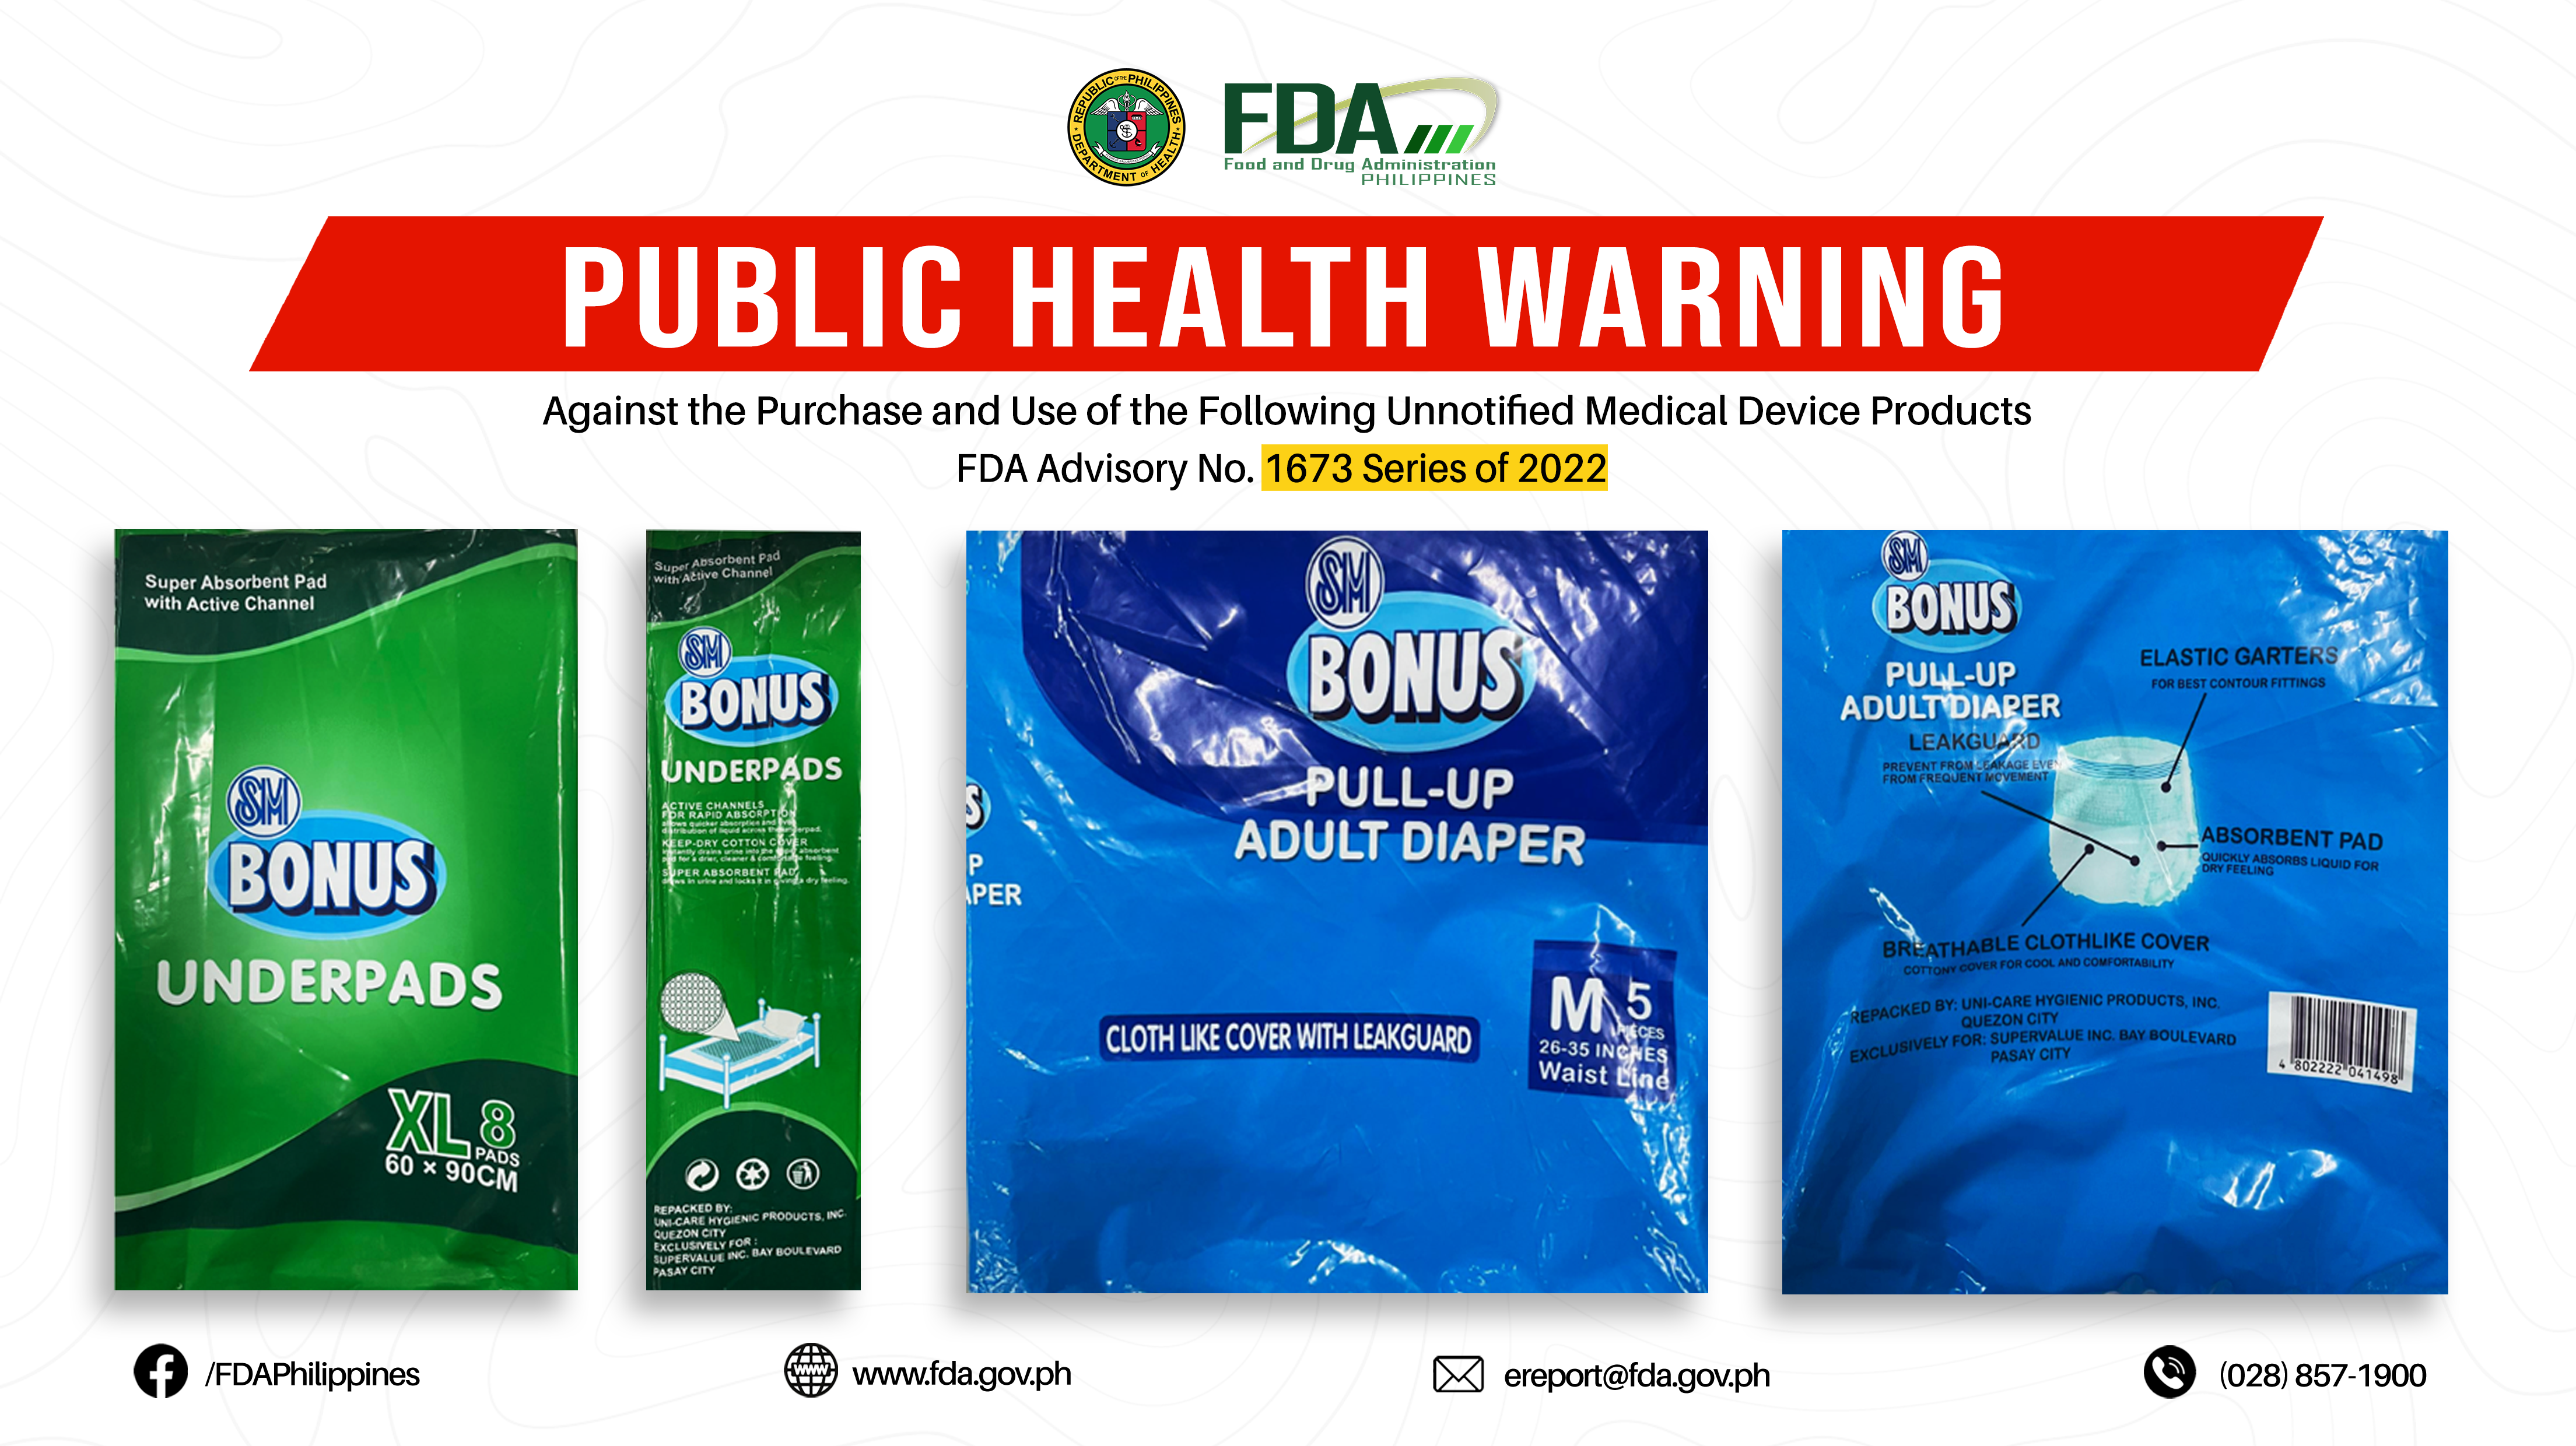 FDA Advisory No.2022-1673 || Public Health Warning Against the Purchase and Use of the Following Unnotified Medical Device Products: